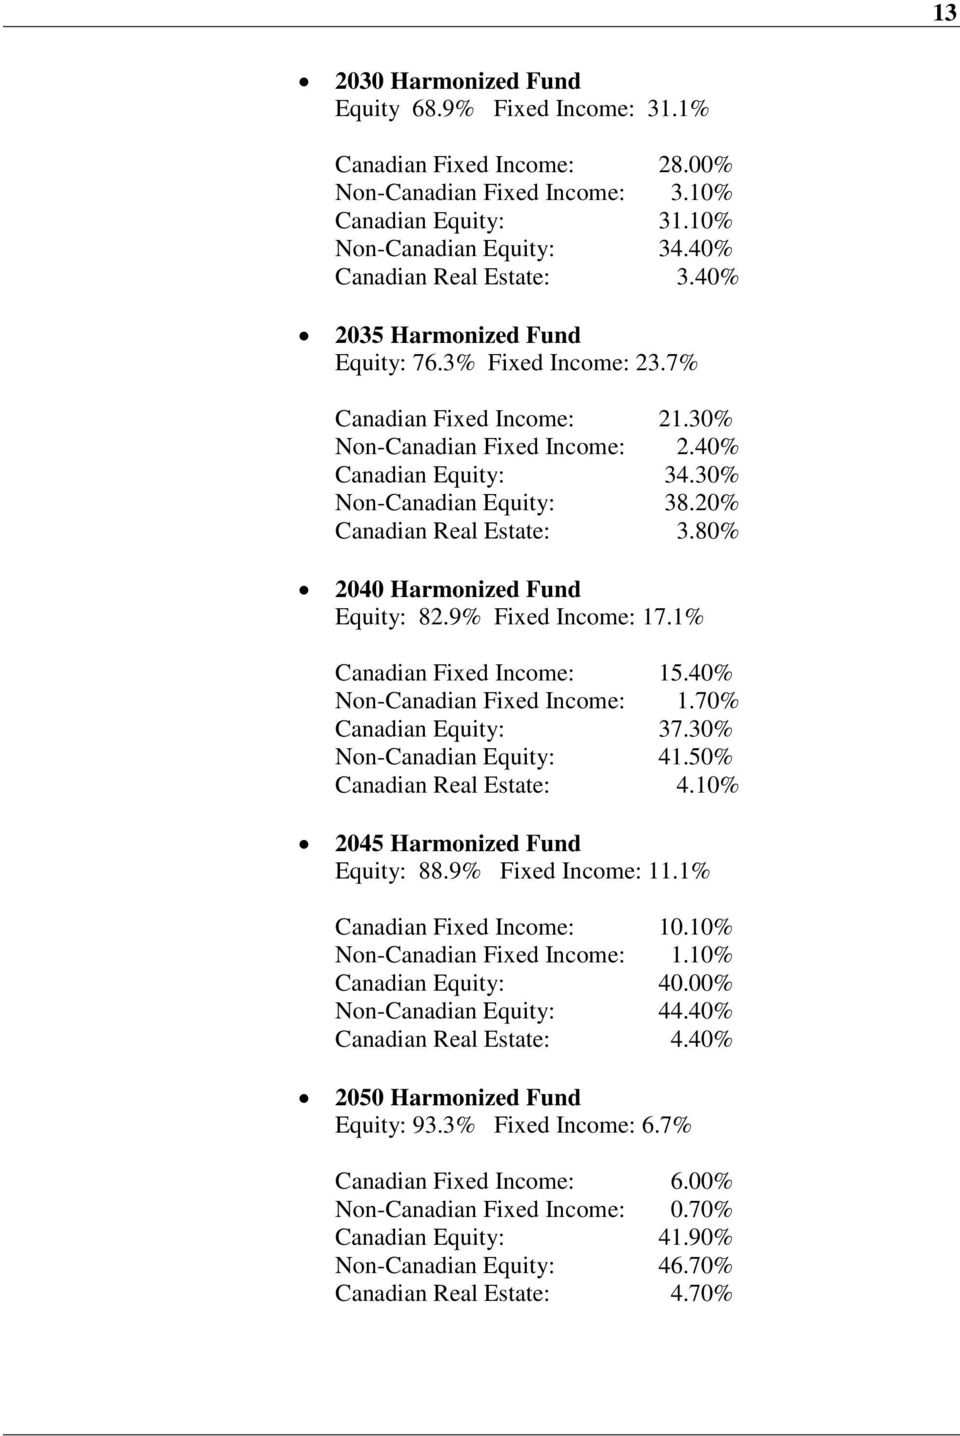 80% 2040 Harmonized Fund Equity: 82.9% Fixed Income: 17.1% Canadian Fixed Income: 15.40% Non-Canadian Fixed Income: 1.70% Canadian Equity: 37.30% Non-Canadian Equity: 41.50% Canadian Real Estate: 4.